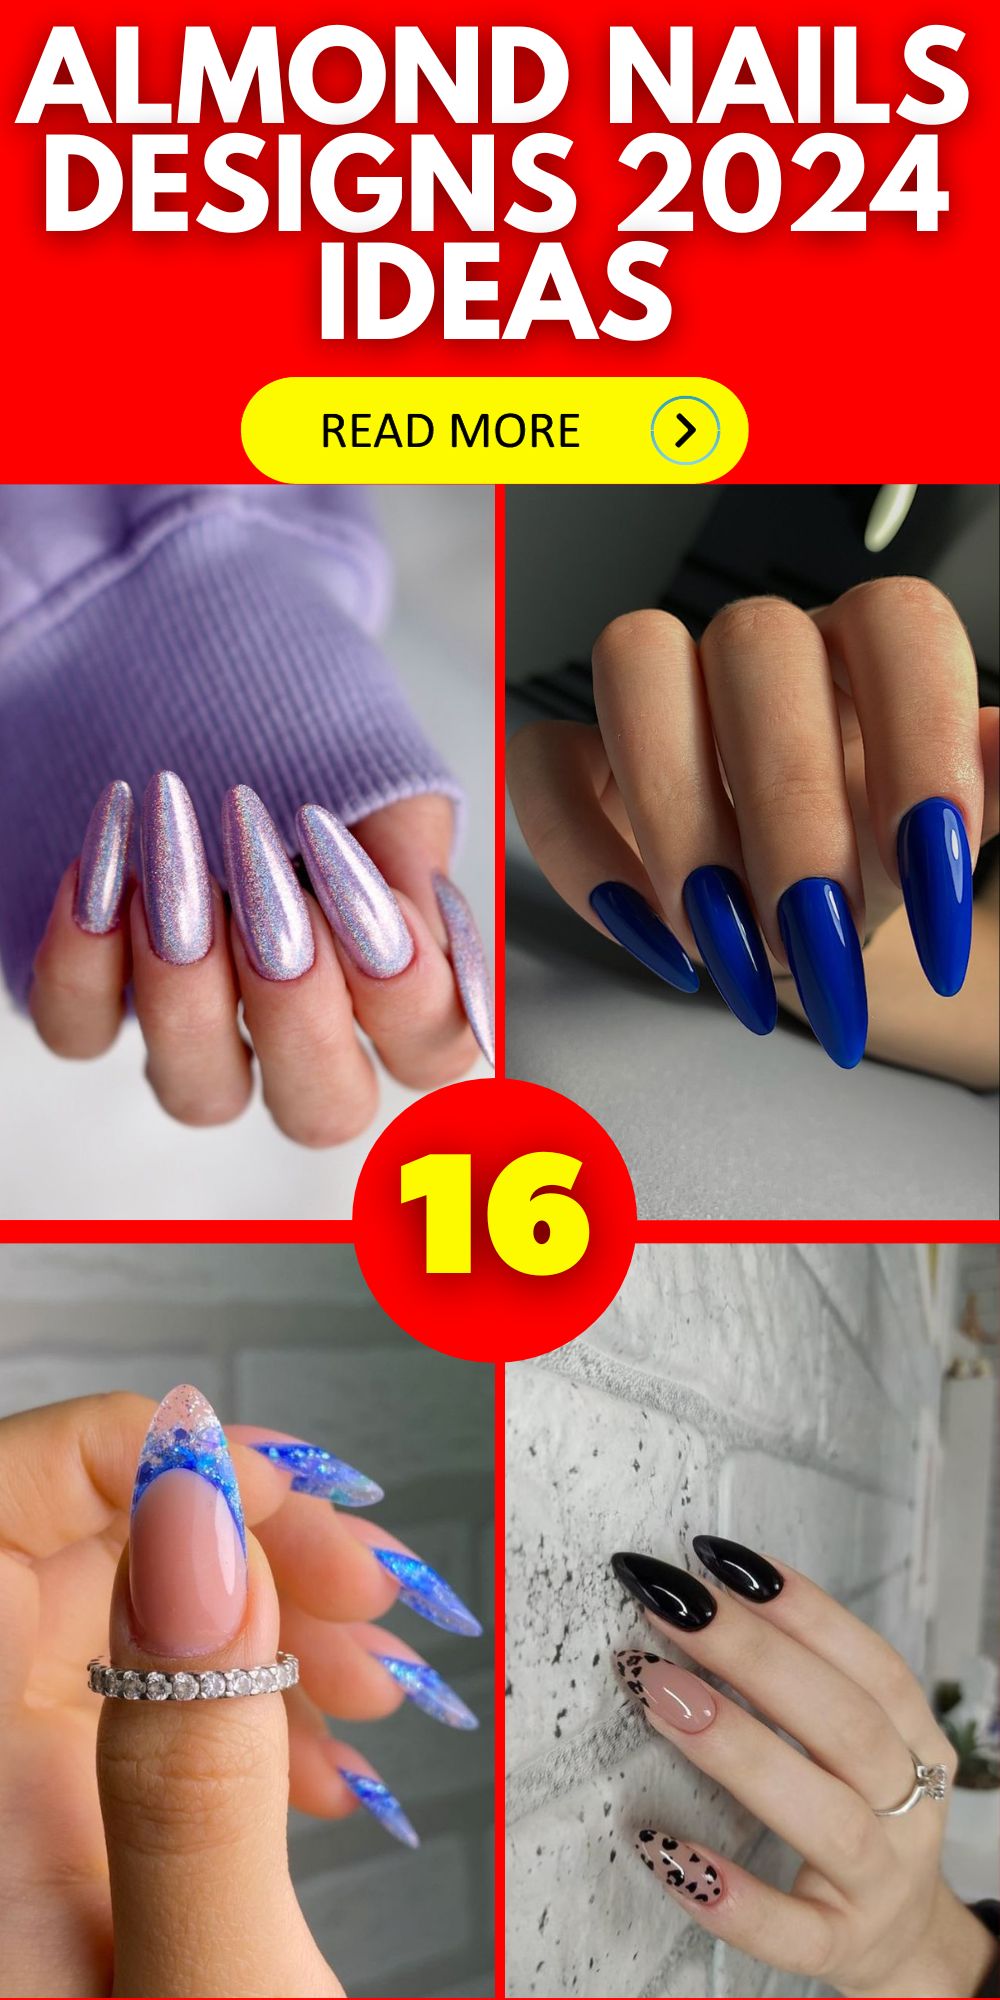 Discover Almond Nail Designs 2024: Chic, Cute & Bold Trends